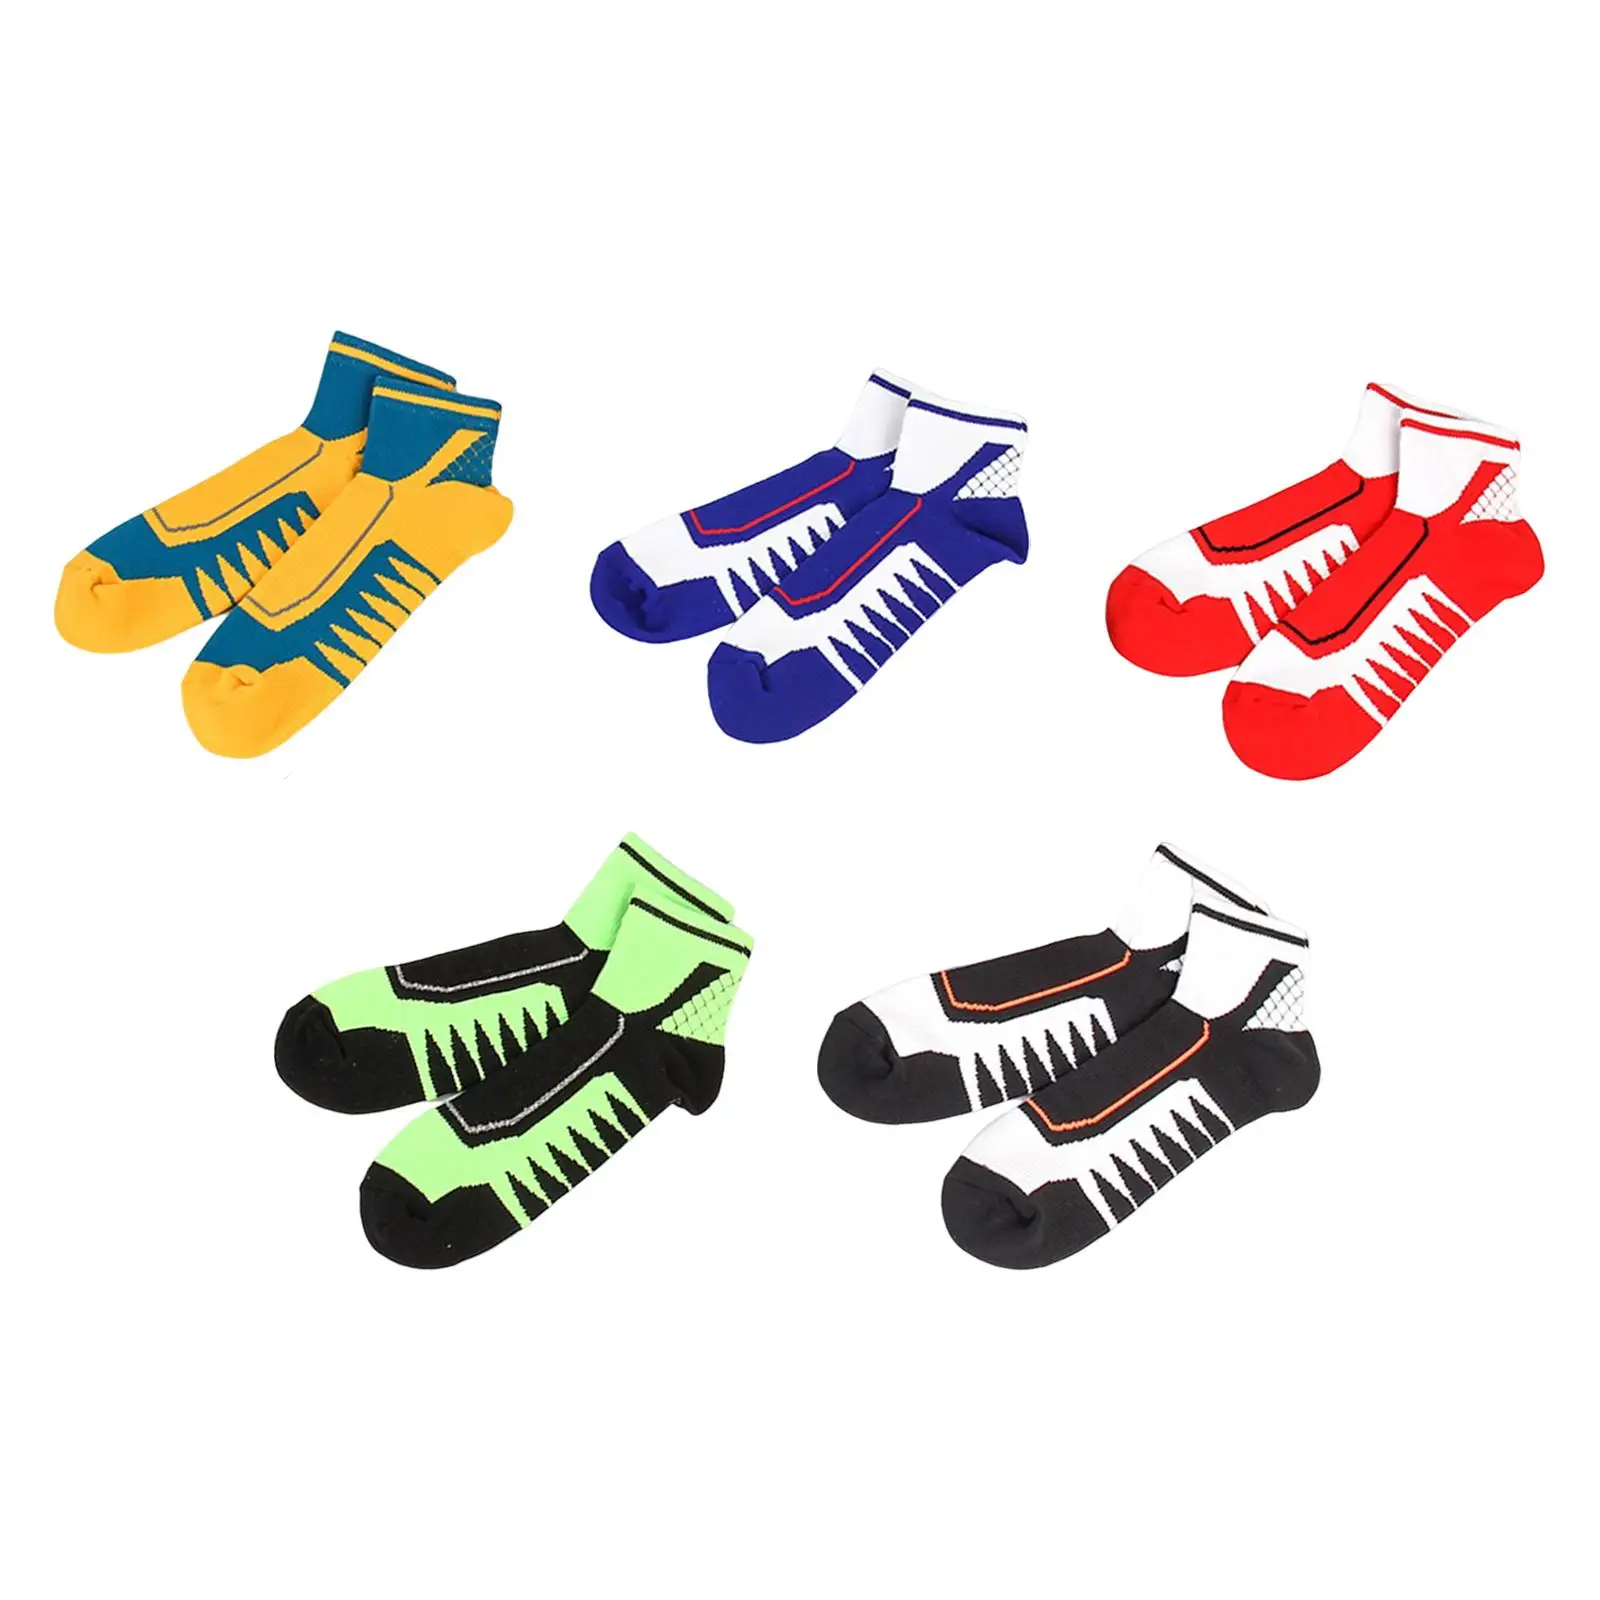 Thicker Athletic Sports Ankle Socks Breathable Absorb Sweat 5 Pairs Men Crew Socks for New Year Bedroom Party Living Room Hiking